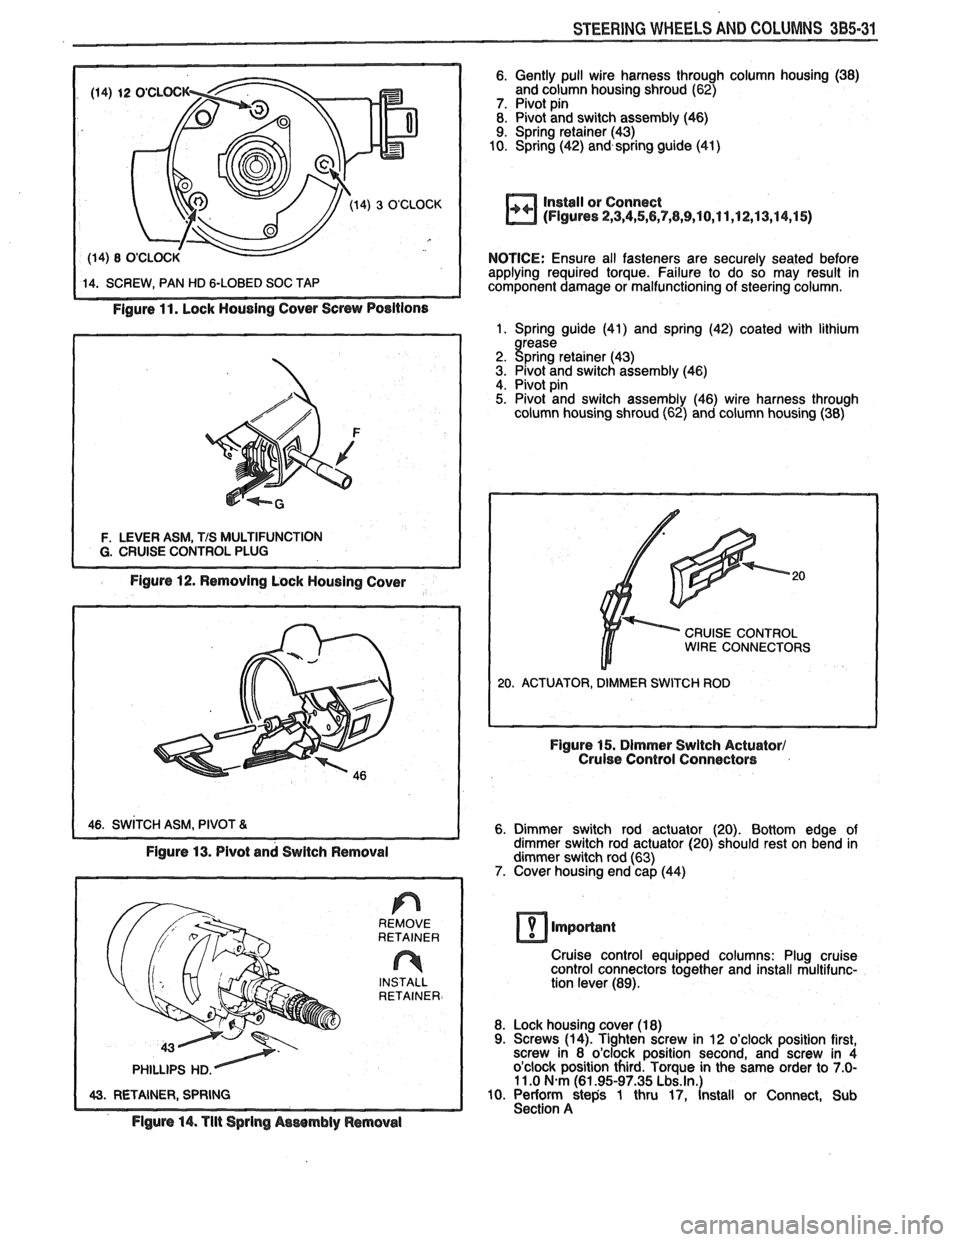 PONTIAC FIERO 1988  Service Repair Manual 
STEERING WHEELS AND COLUMNS 385-31 
Figure 11. Lock  Housing  Cover Screw  Positions 
F. LEVER ASM, TIS MULTIFUNCTION 
Figure 12. Removing  Lock Housing Cover 
6. Gently pull wire  harness  through  